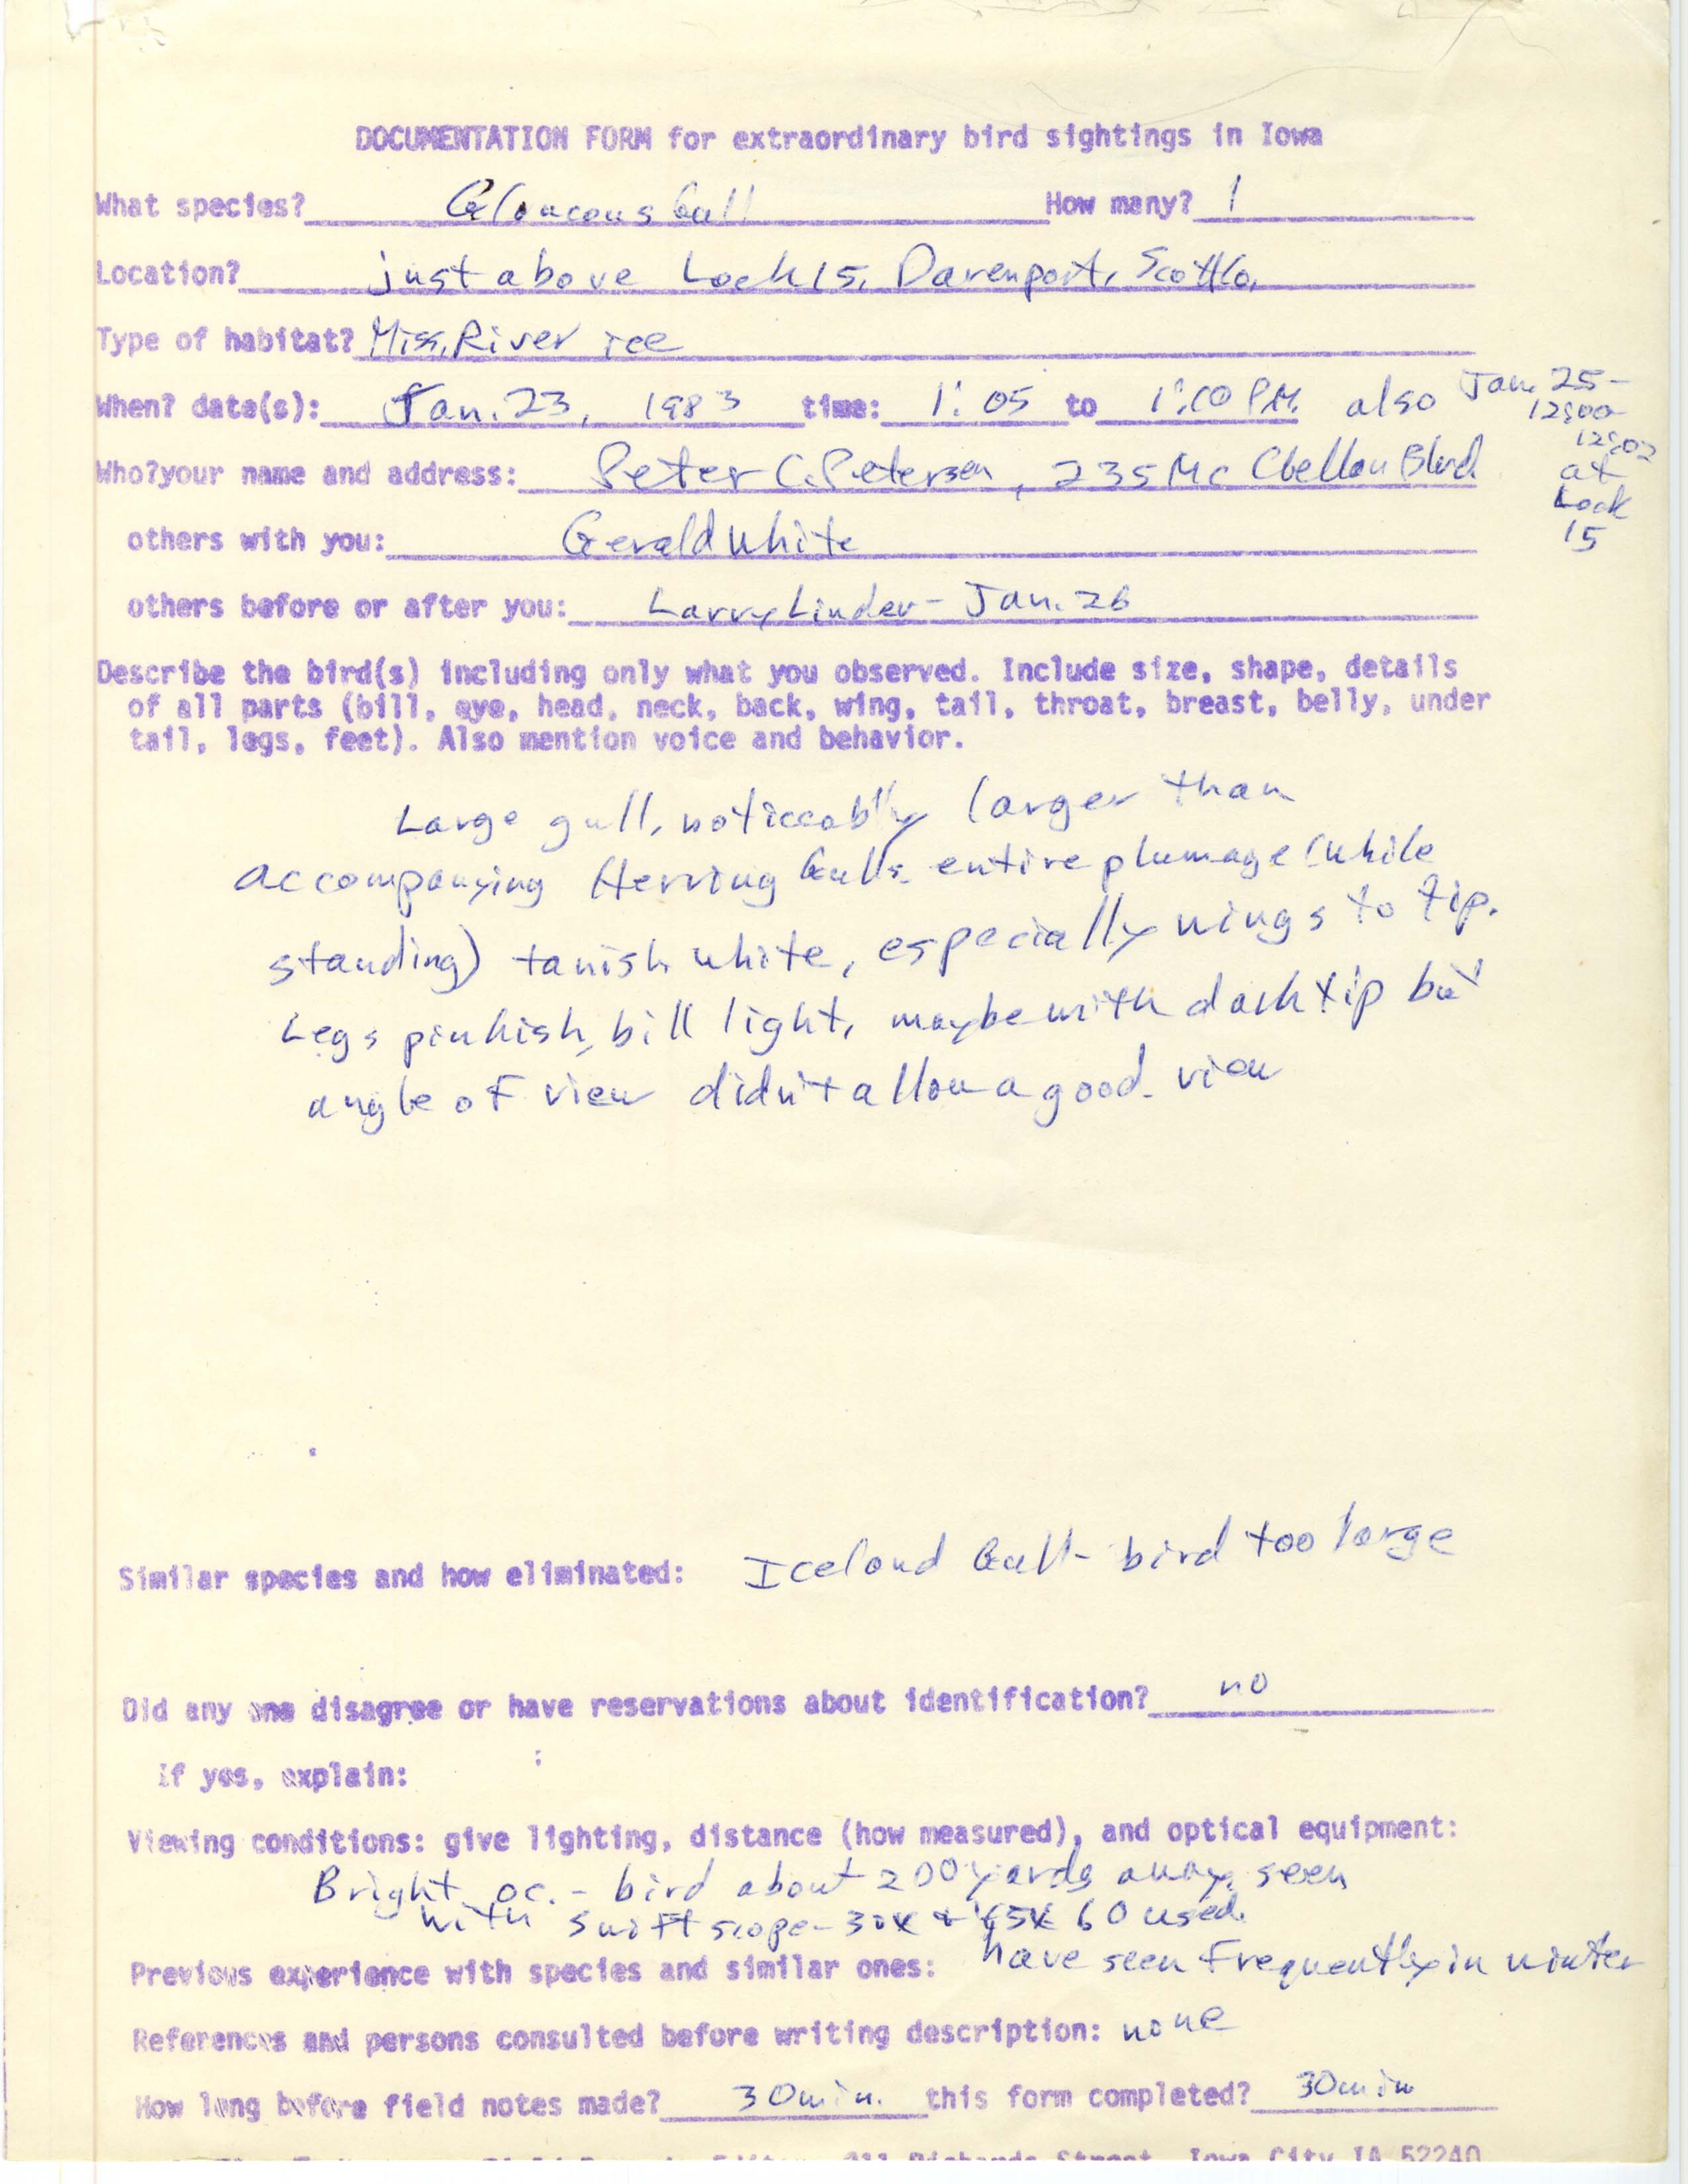 Rare bird documentation form for Glaucous Gull at Lock and Dam 15, 1983